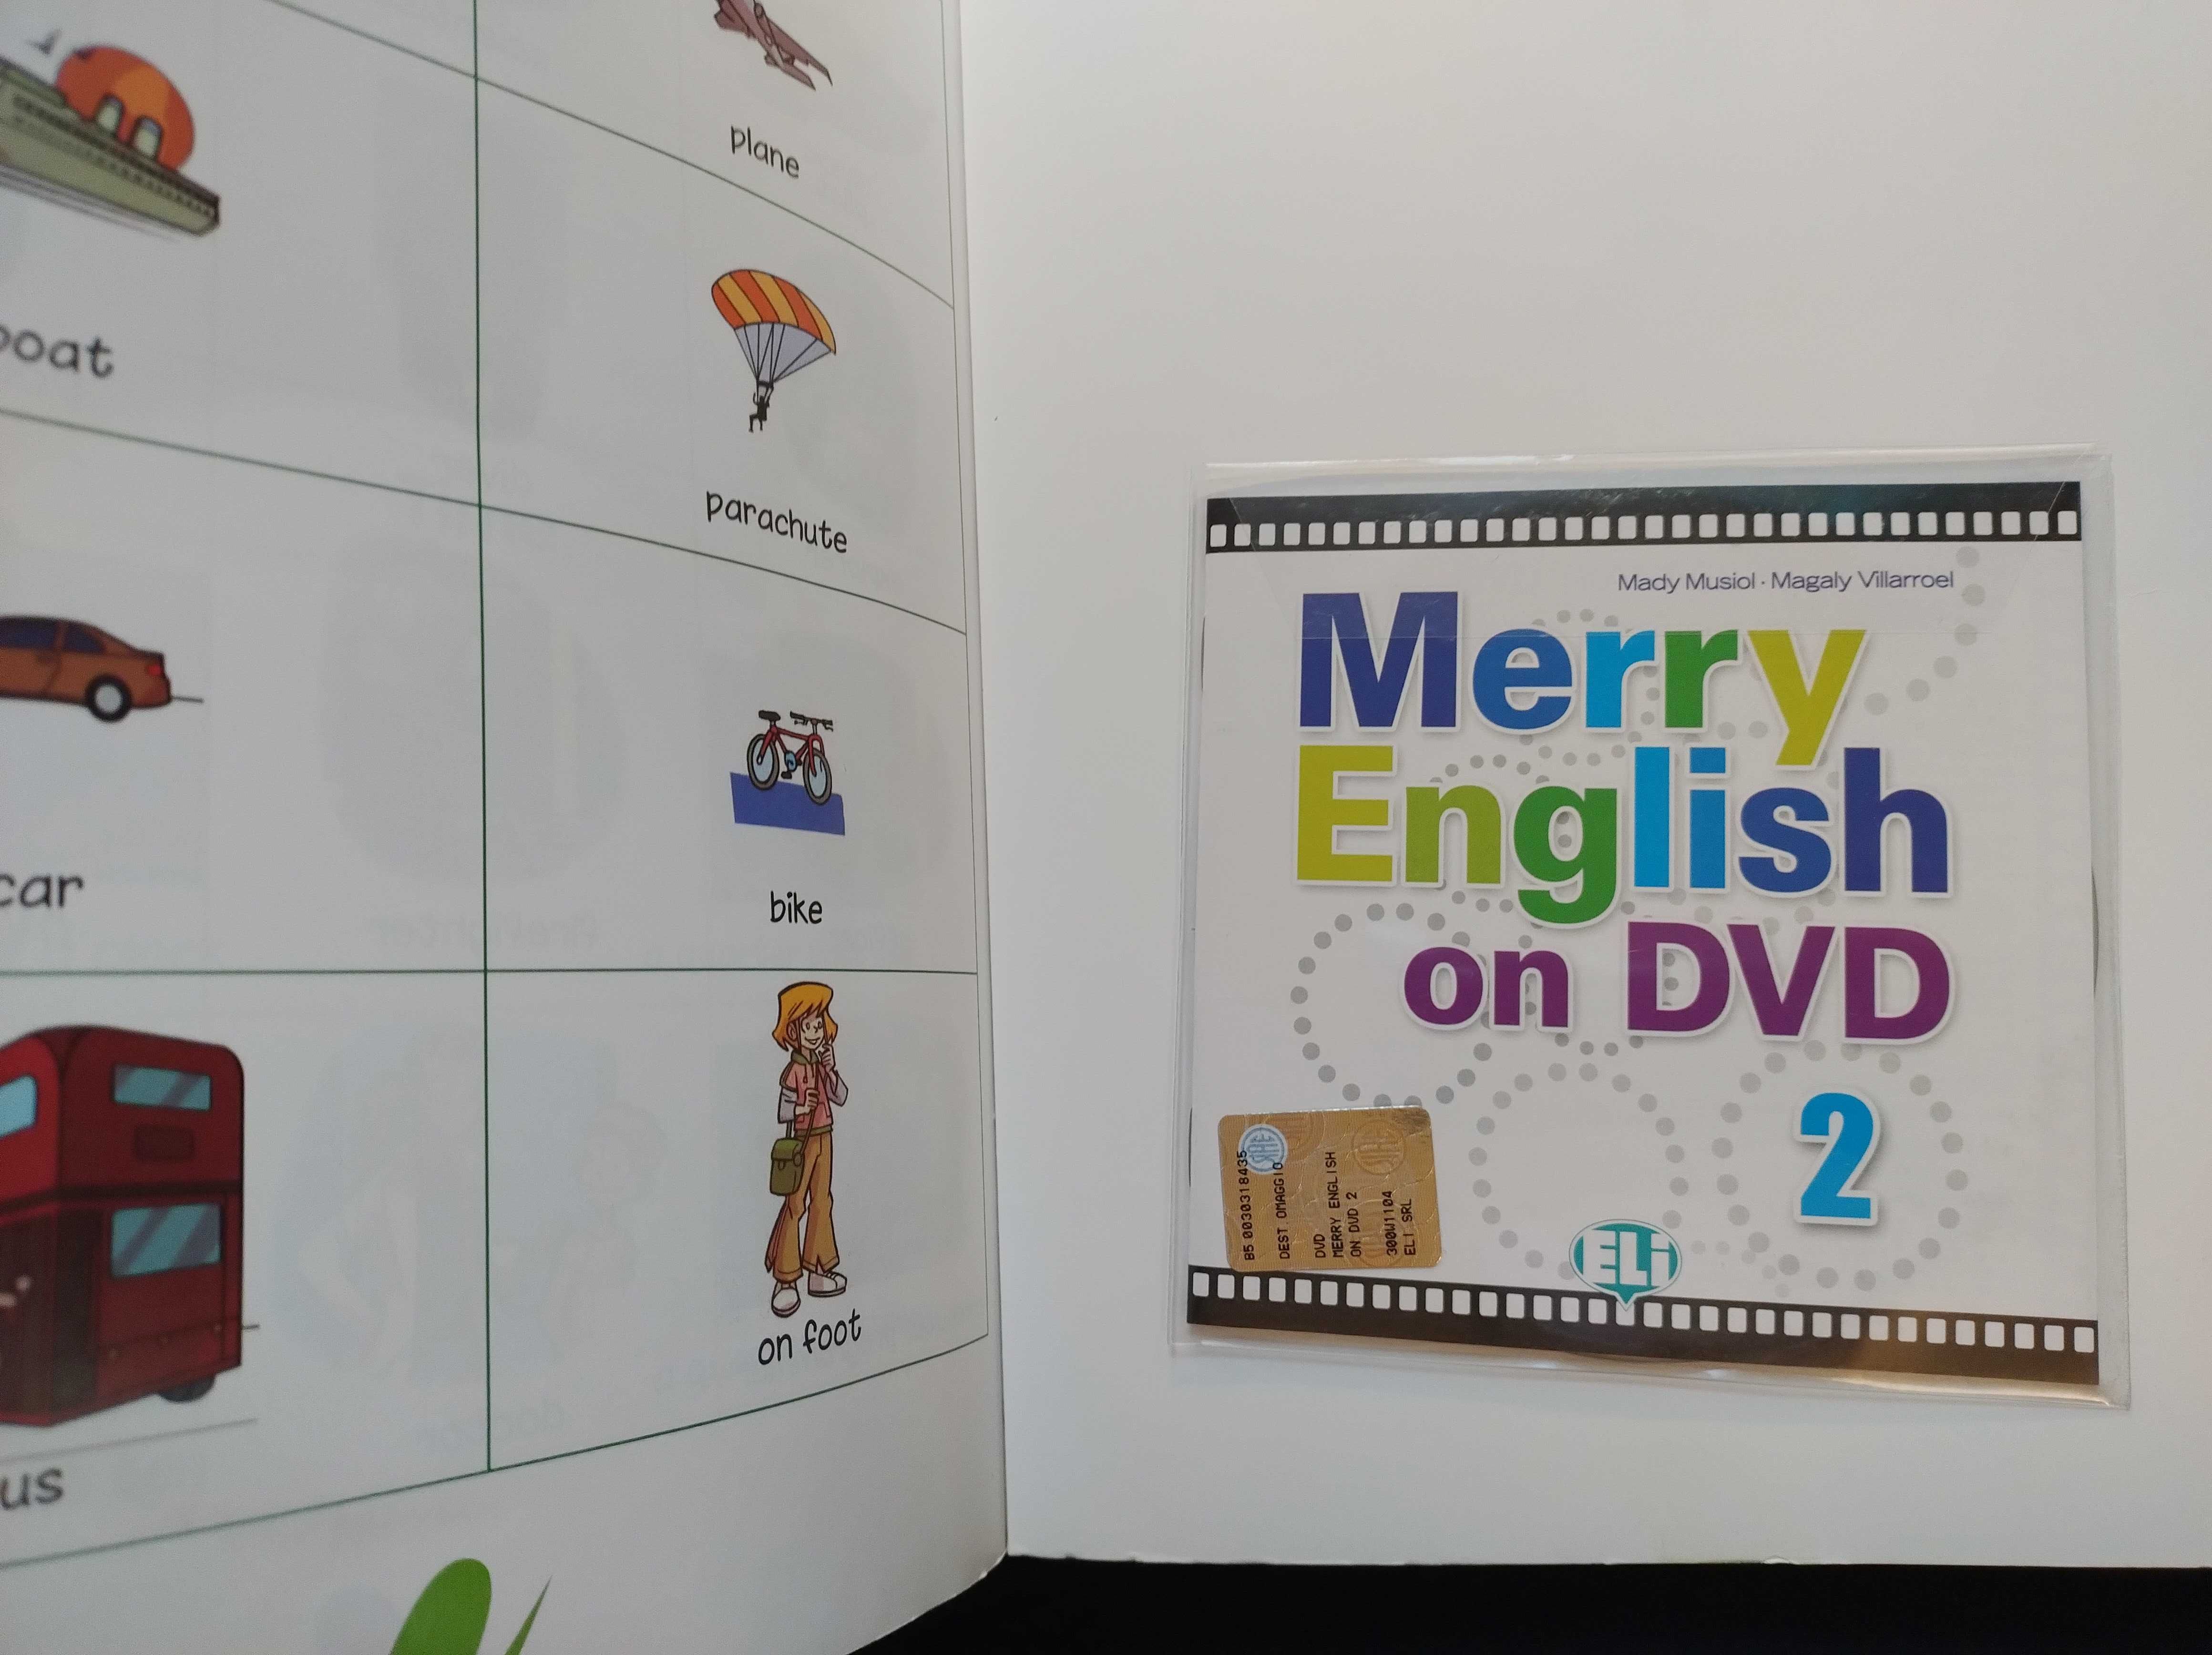 Merry English on DVD 2 - NOWA - Mady Musiol, Stories, songs,